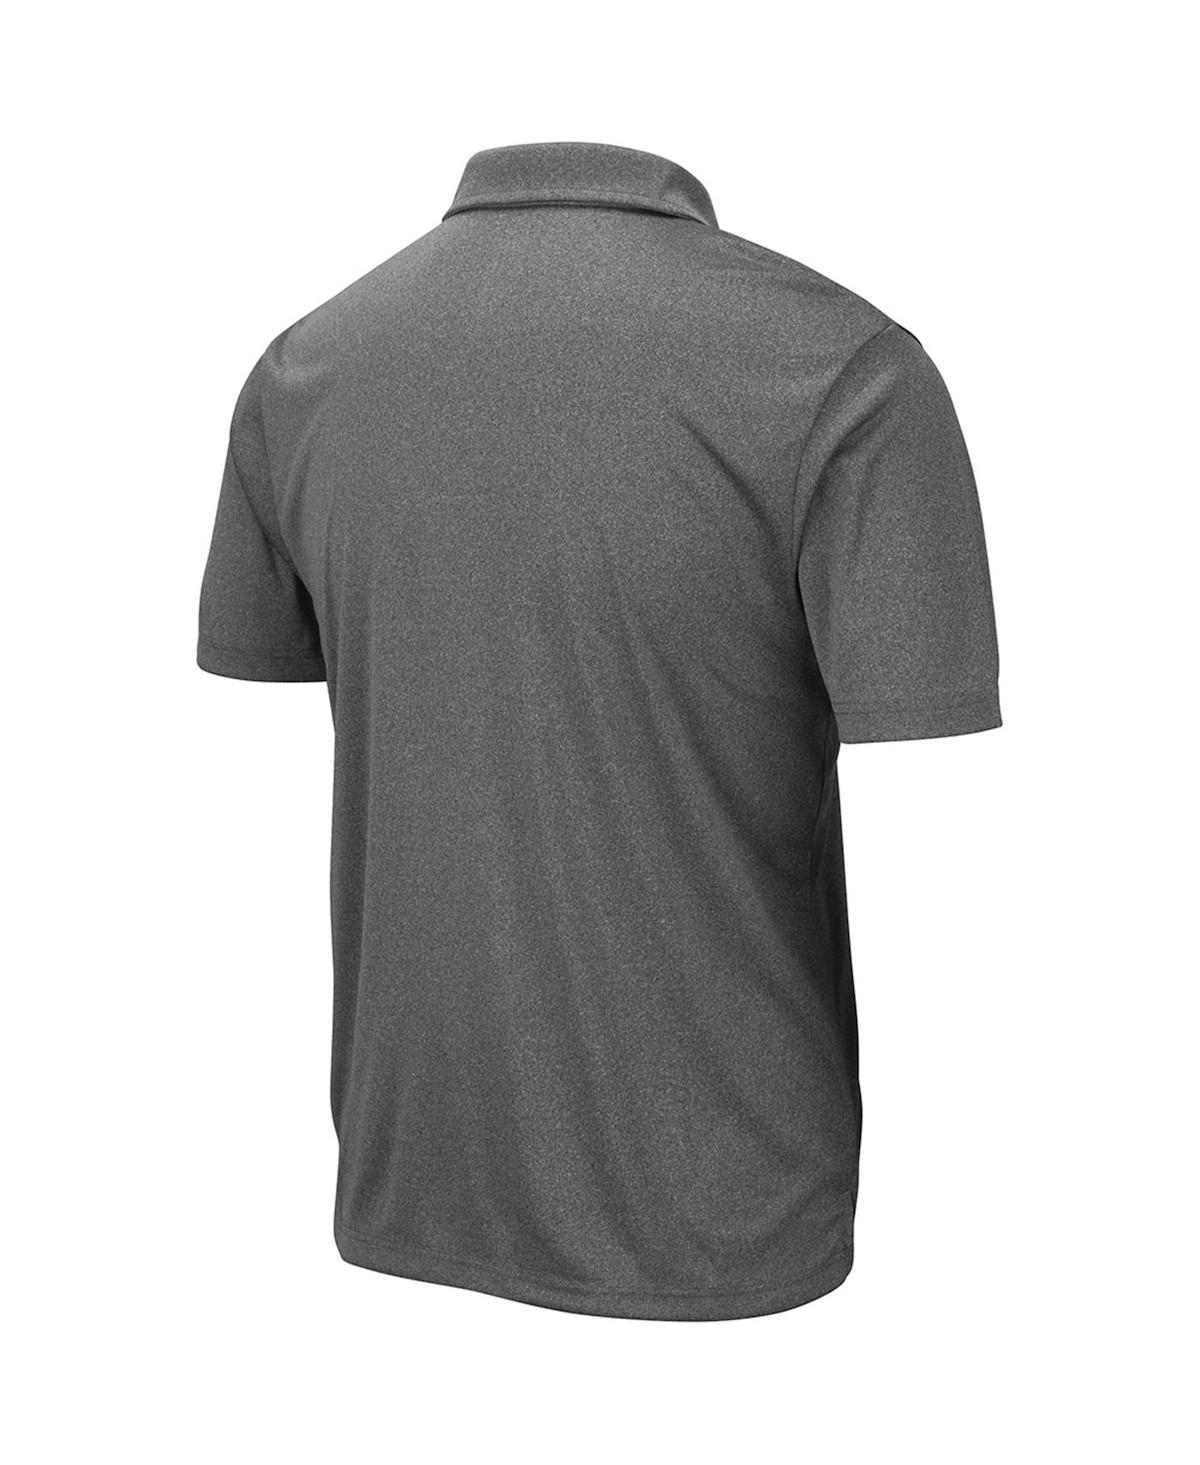 Shop Colosseum Men's  Heathered Charcoal Gonzaga Bulldogs Smithers Polo Shirt In Heather Charcoal